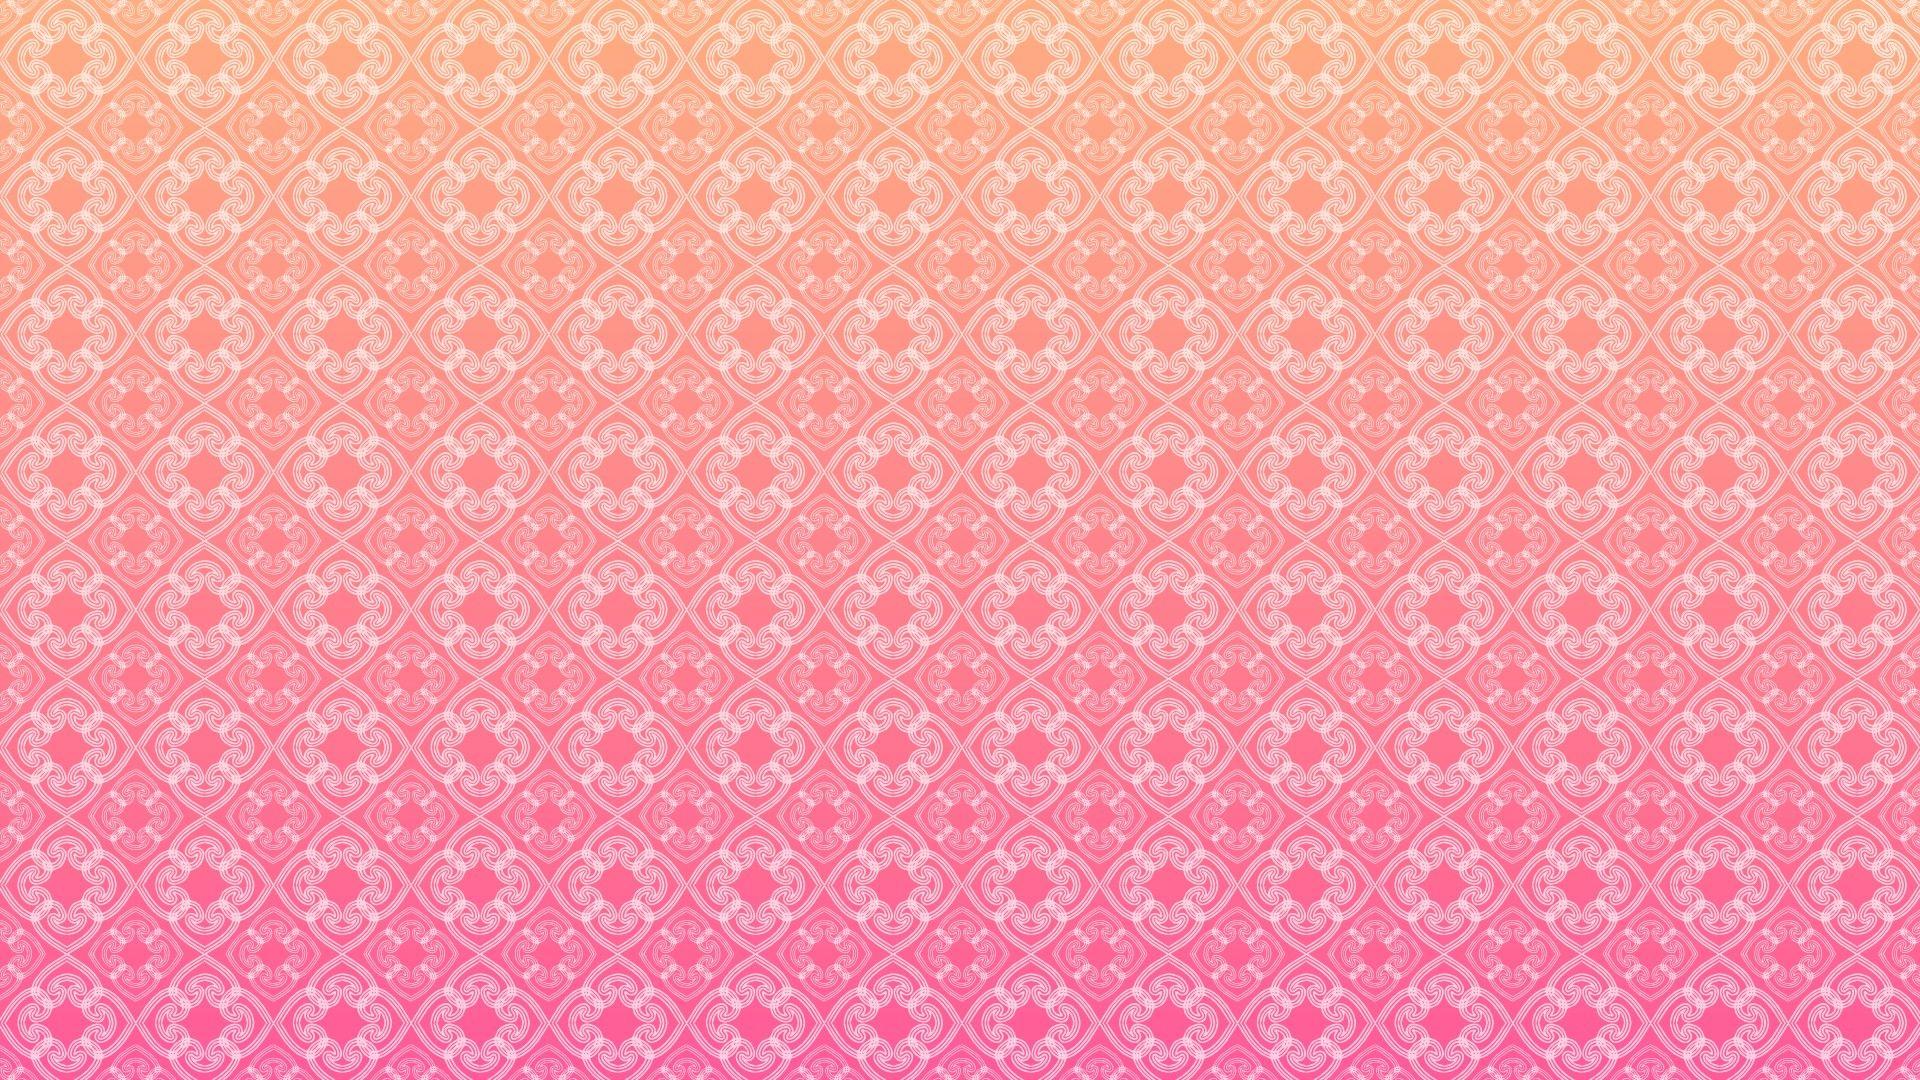 Tumblr Pattern Wallpapers - Top Free Tumblr Pattern Backgrounds ...